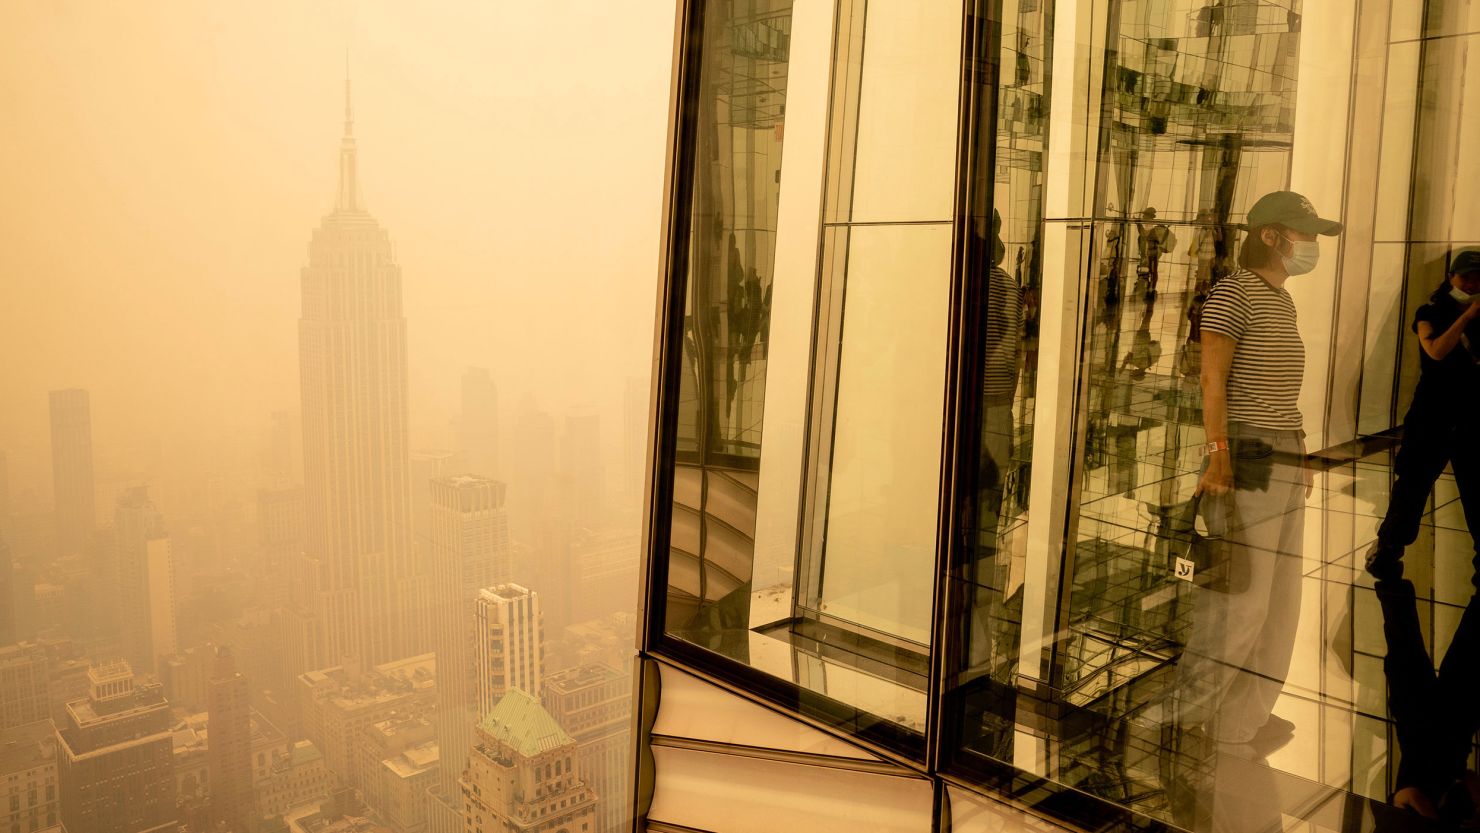 A smoky haze caused by Canadian wildfires is seen outside Summit One Vanderbilt in New York on June 7.